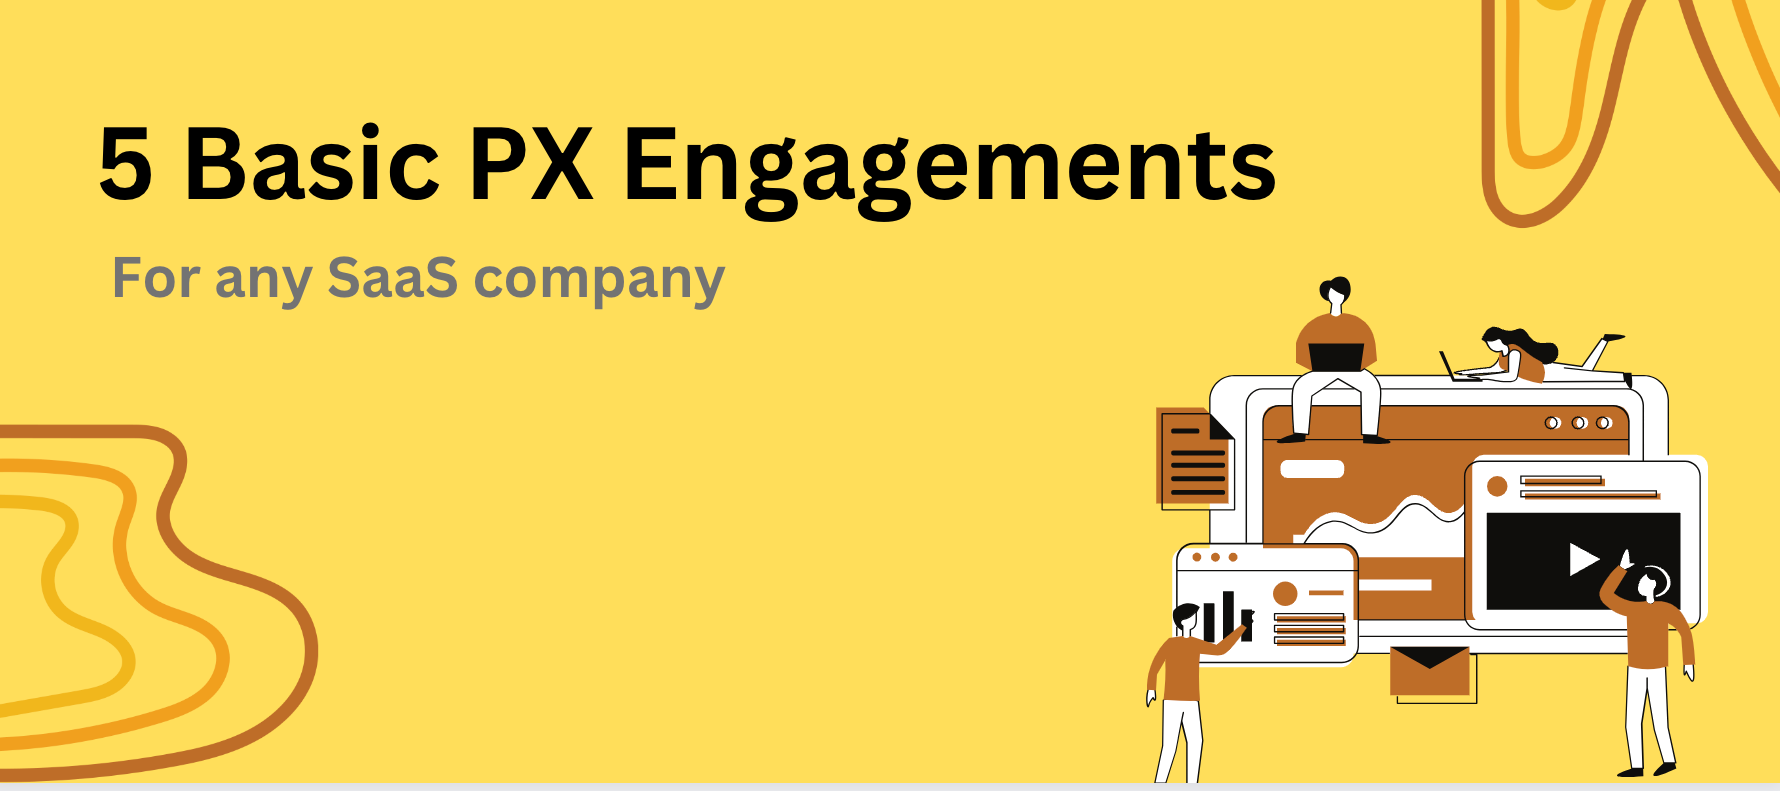 5 Basic Engagements in SaaS - Getting Started with PX Guide!